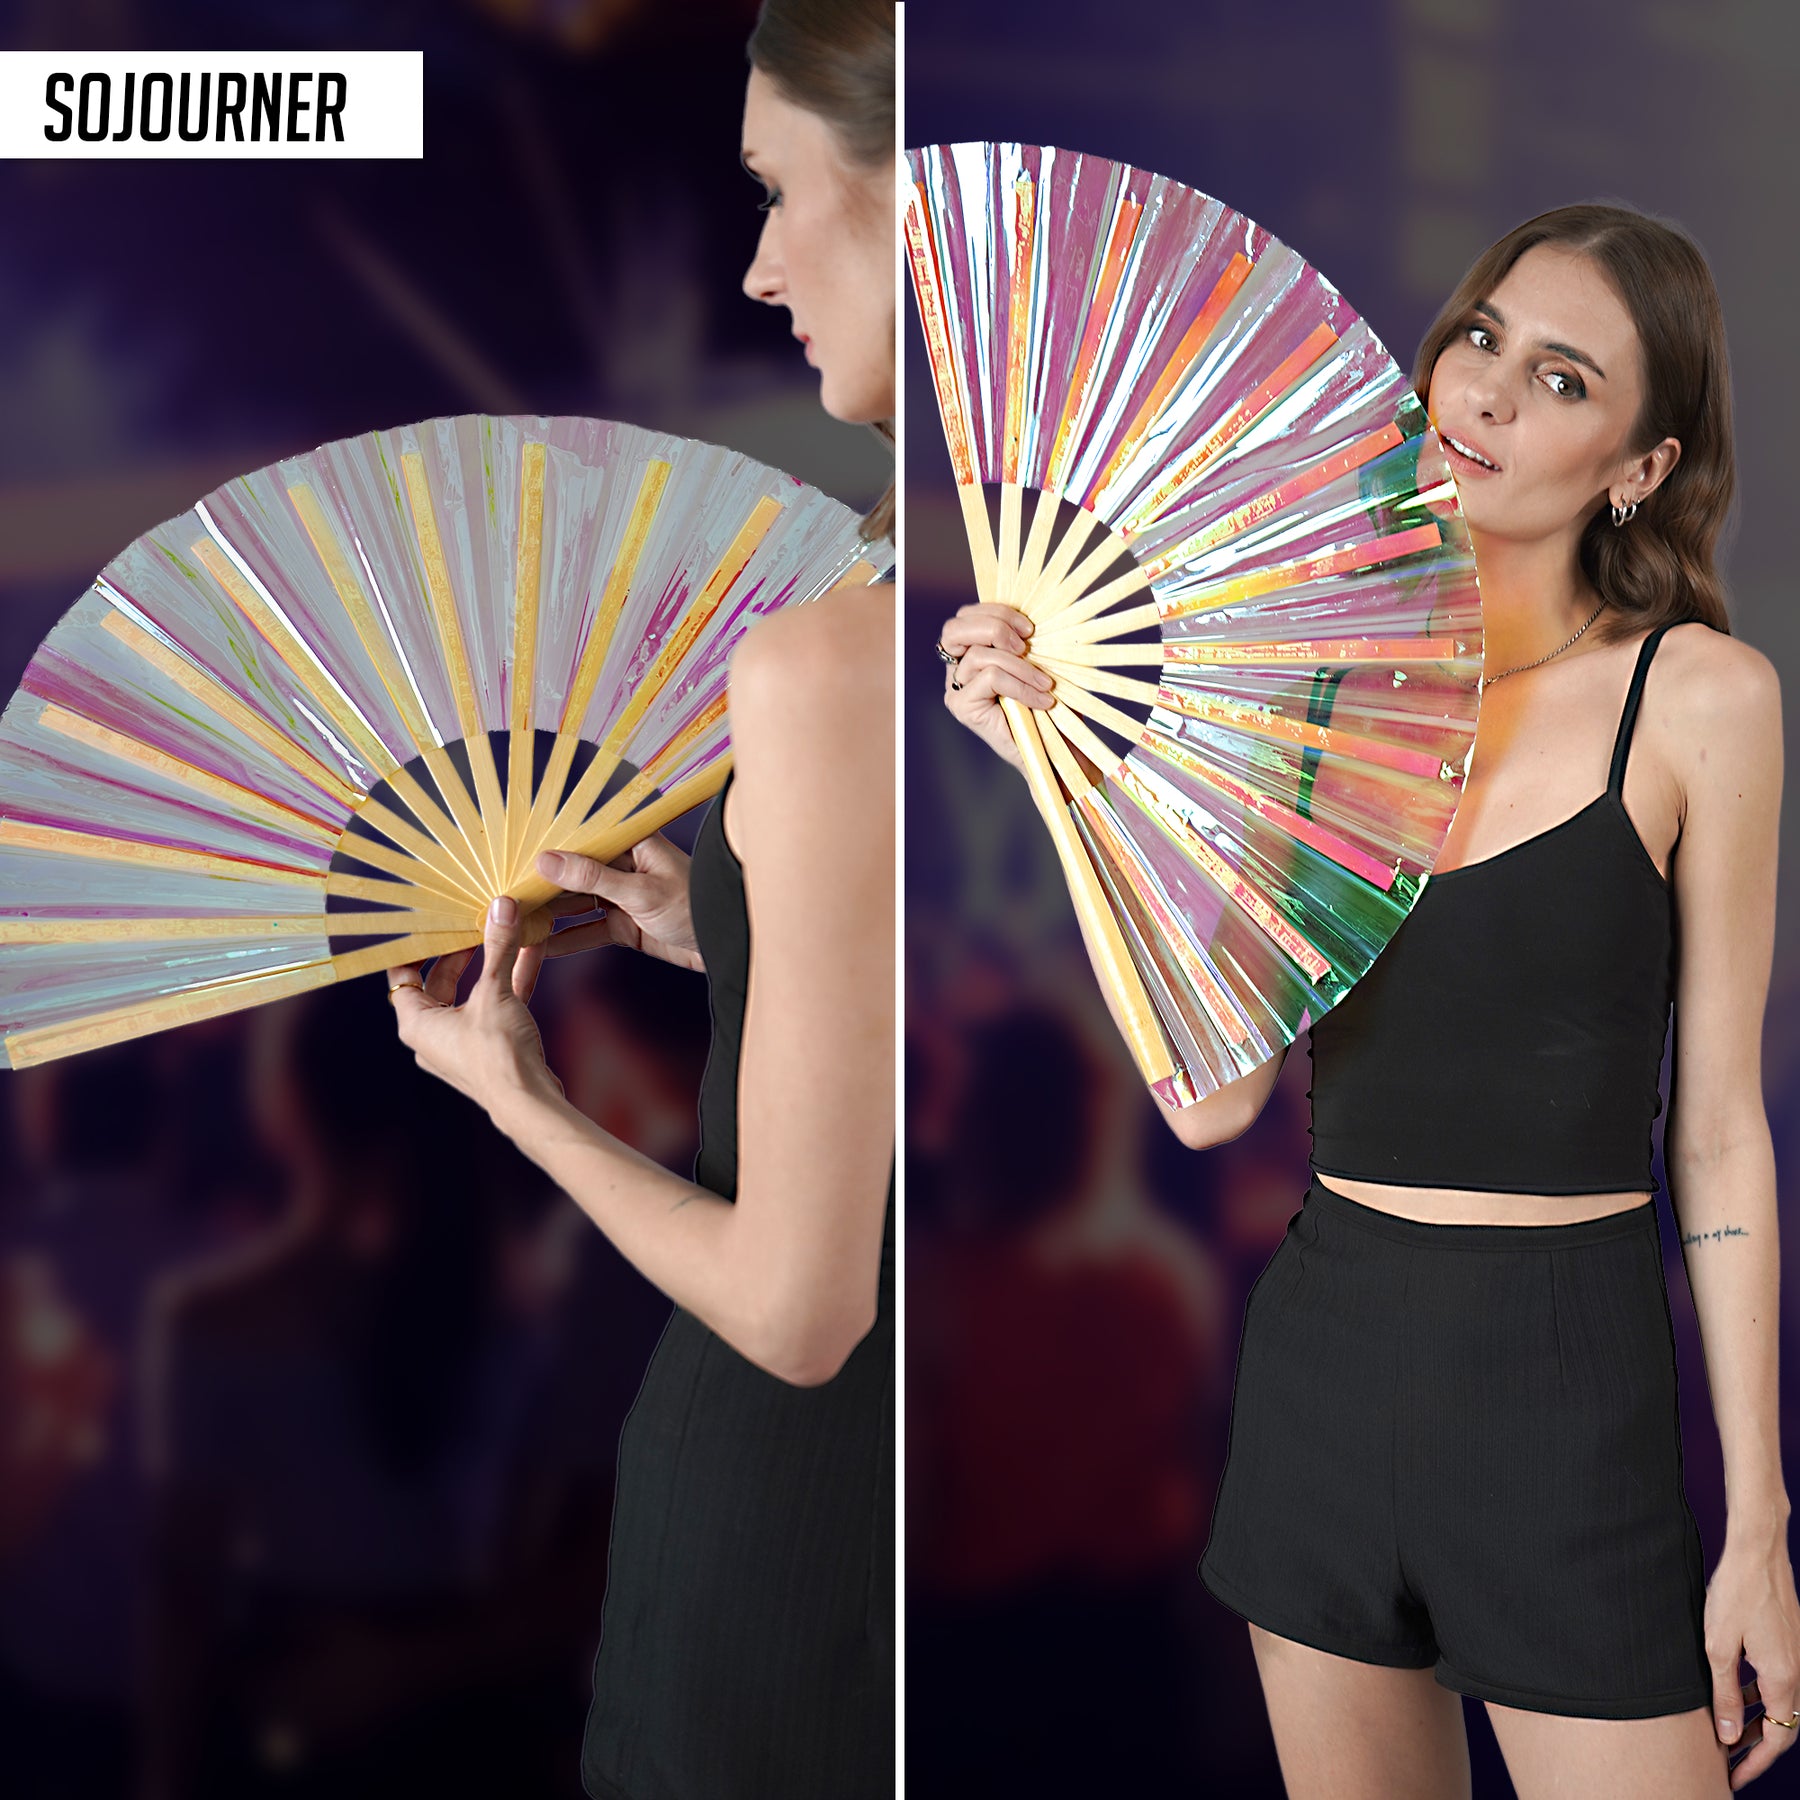 Holographic Rave Fan - Pride Fan and Festival Fan - Large Folding Fan for Festivals (Holographic)